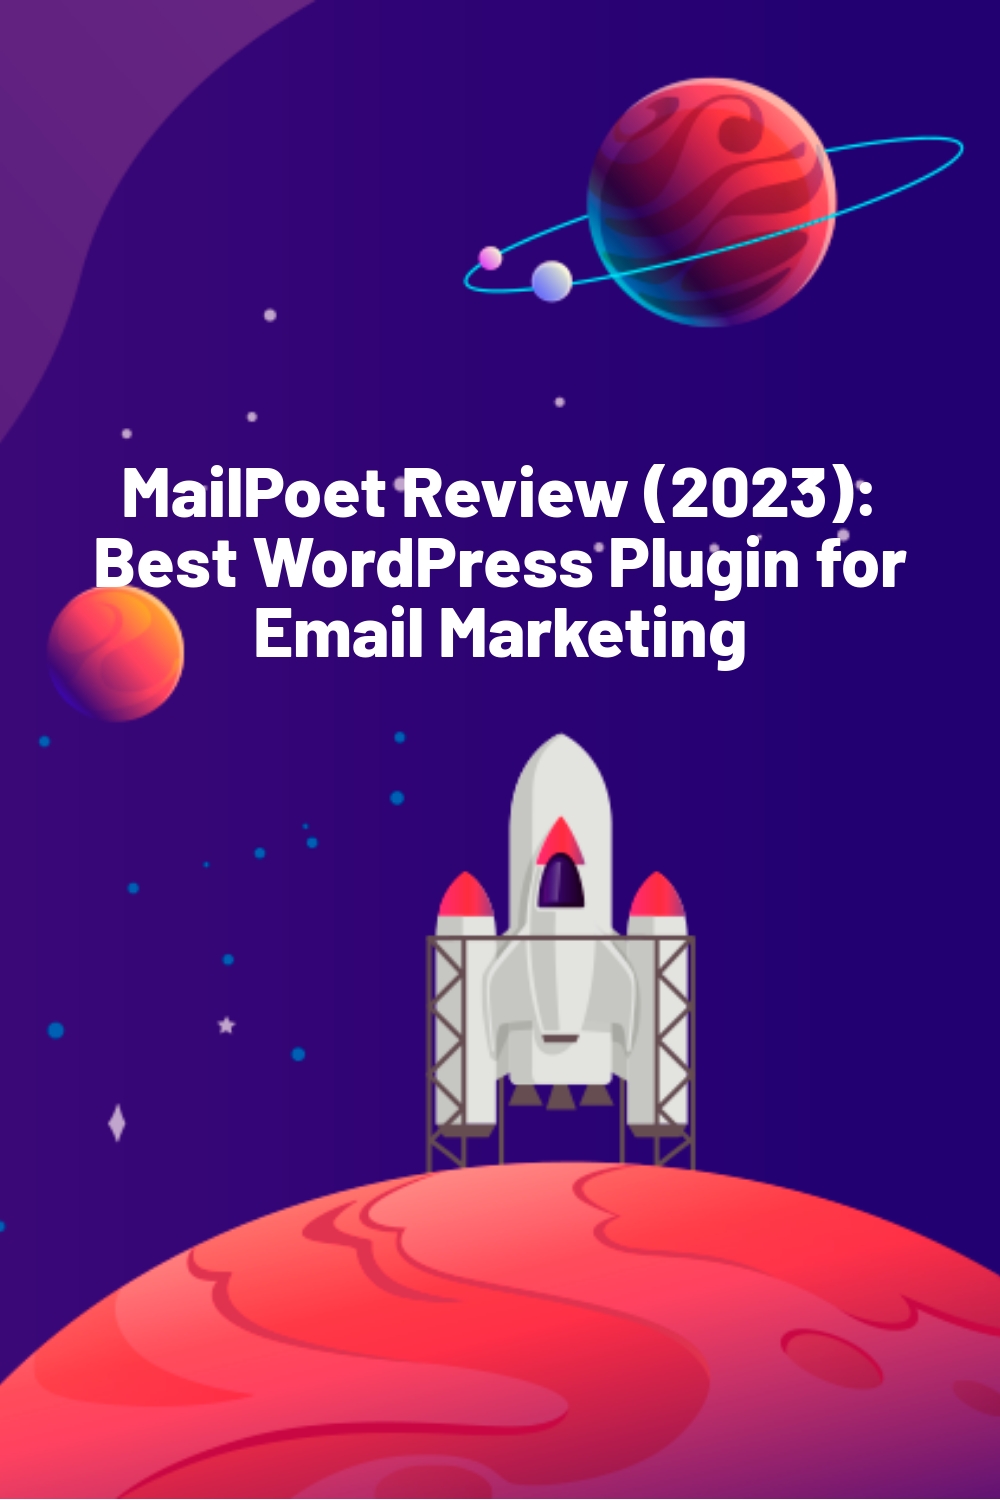 MailPoet Review (2023): Best WordPress Plugin for Email Marketing